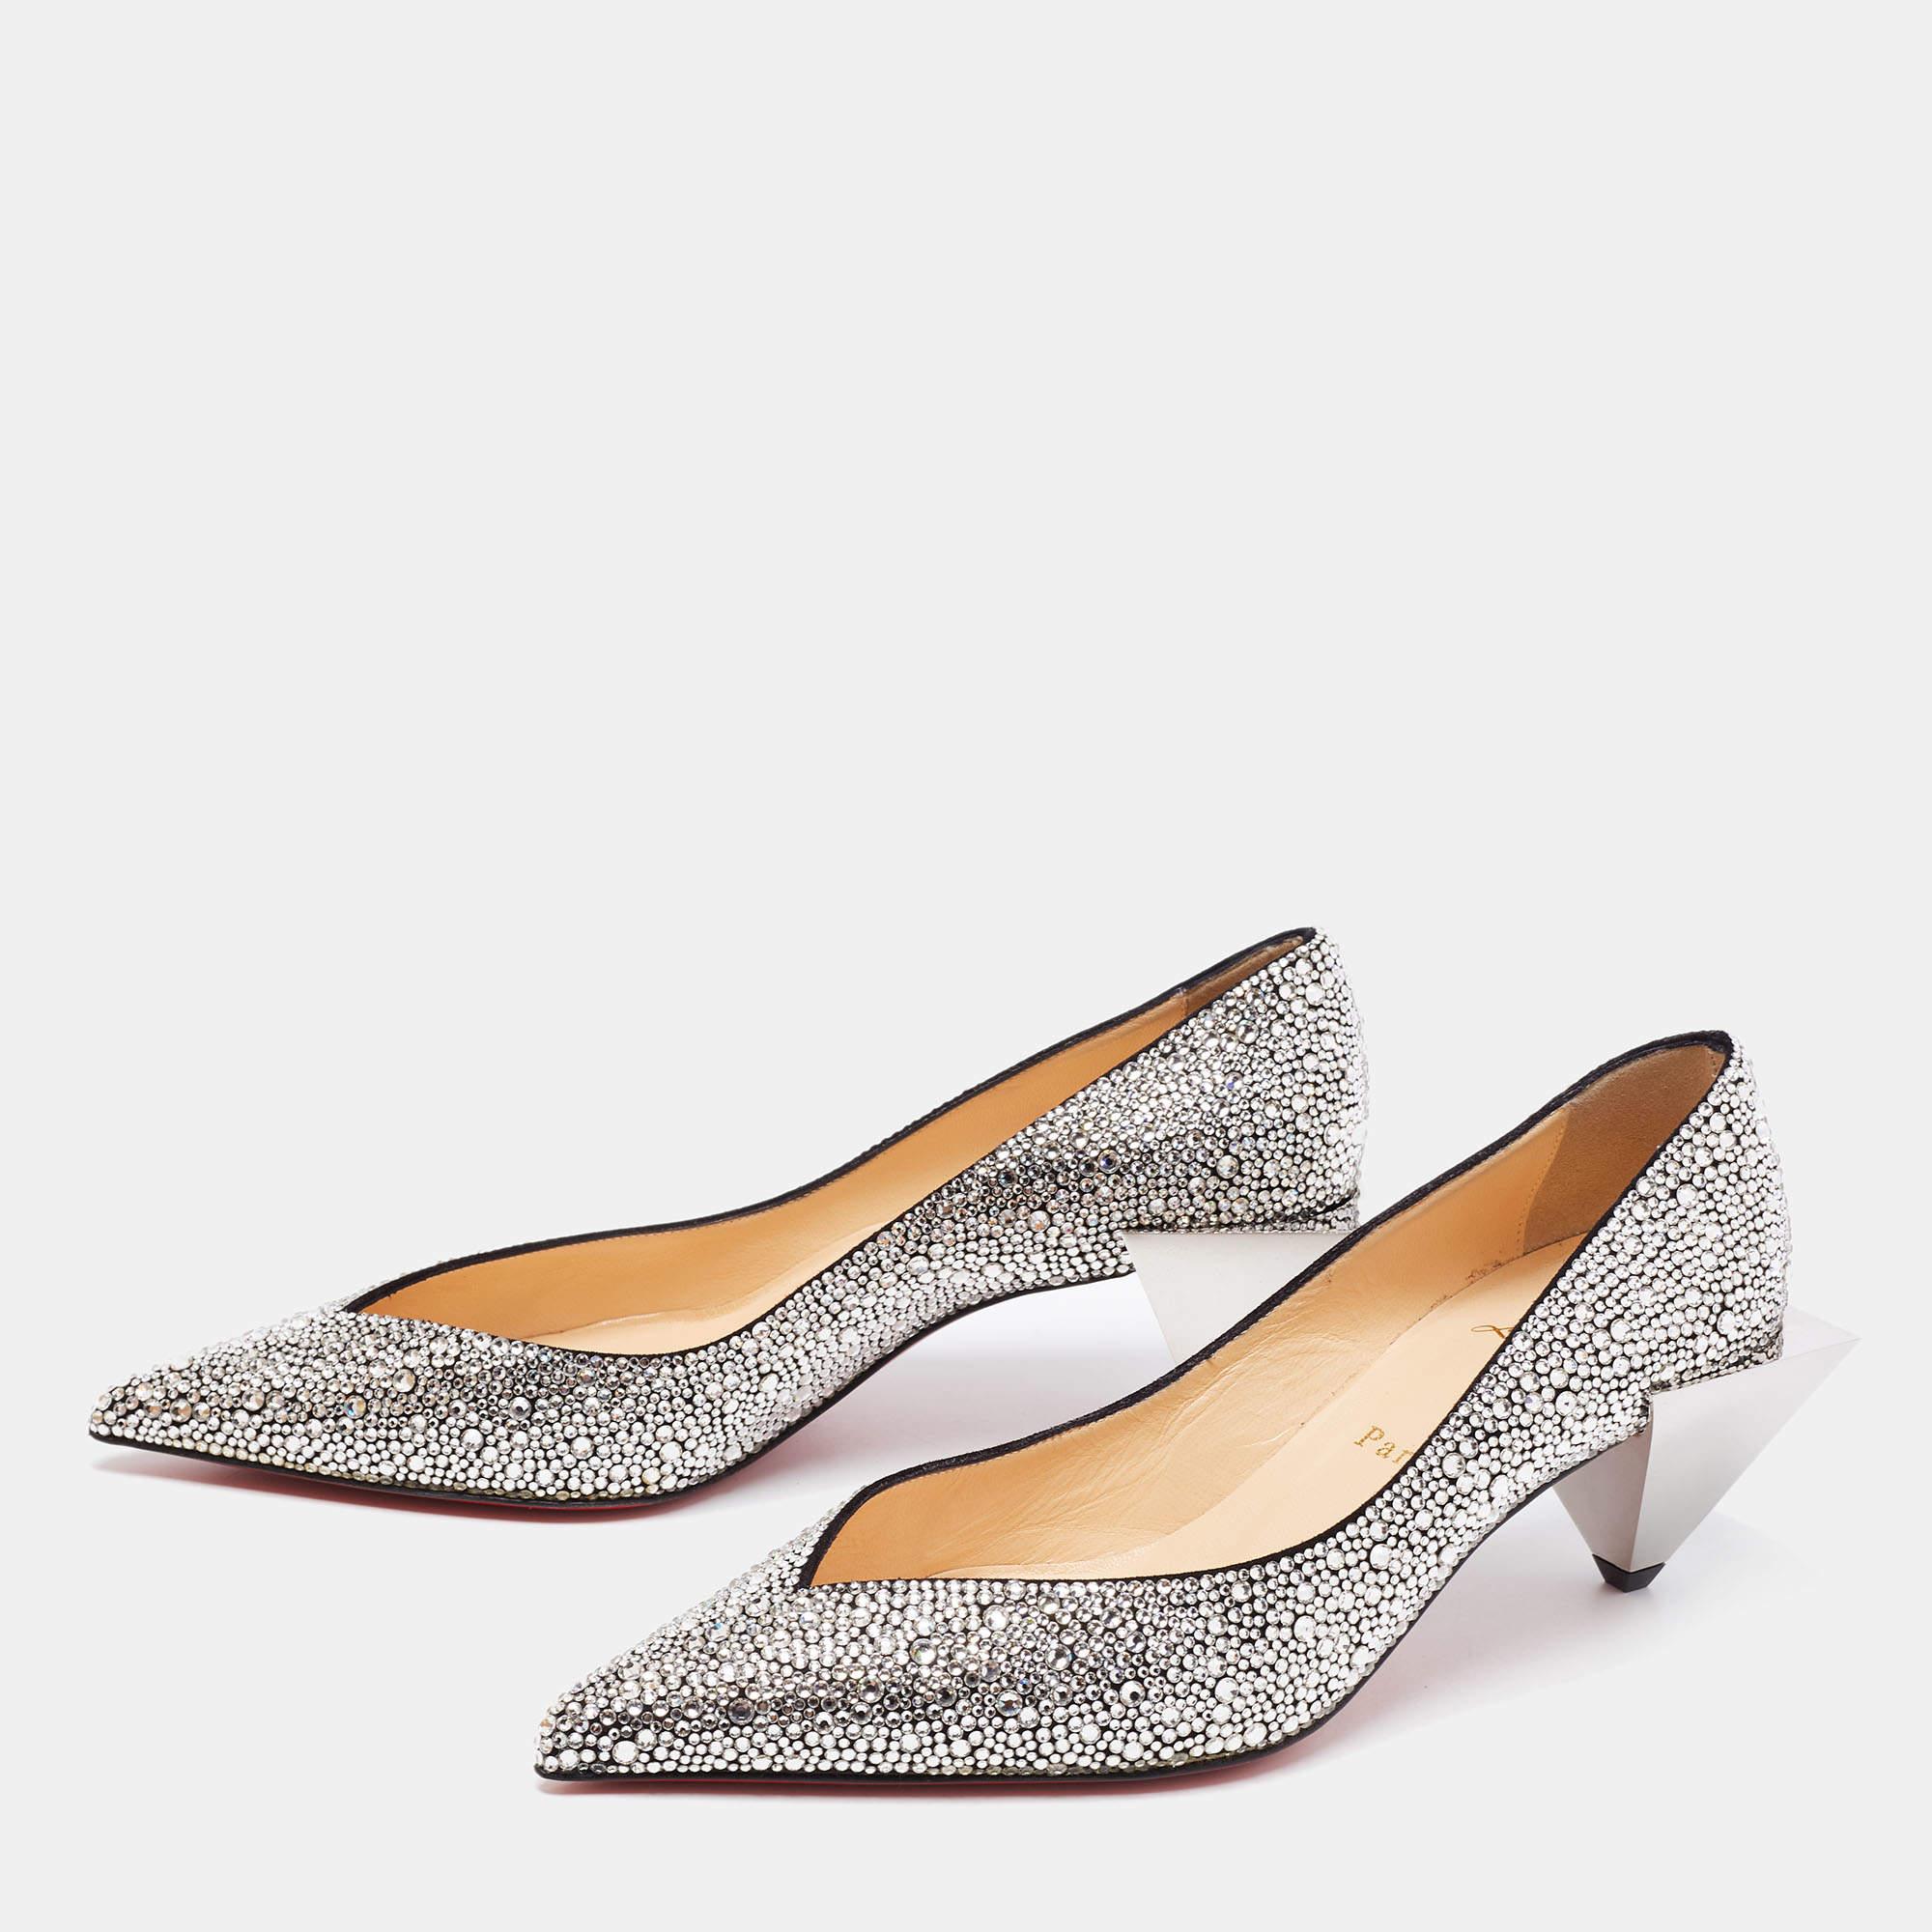 Christian Louboutin Silver Suede Galaxister Strass Pumps Size 37 In Excellent Condition For Sale In Dubai, Al Qouz 2